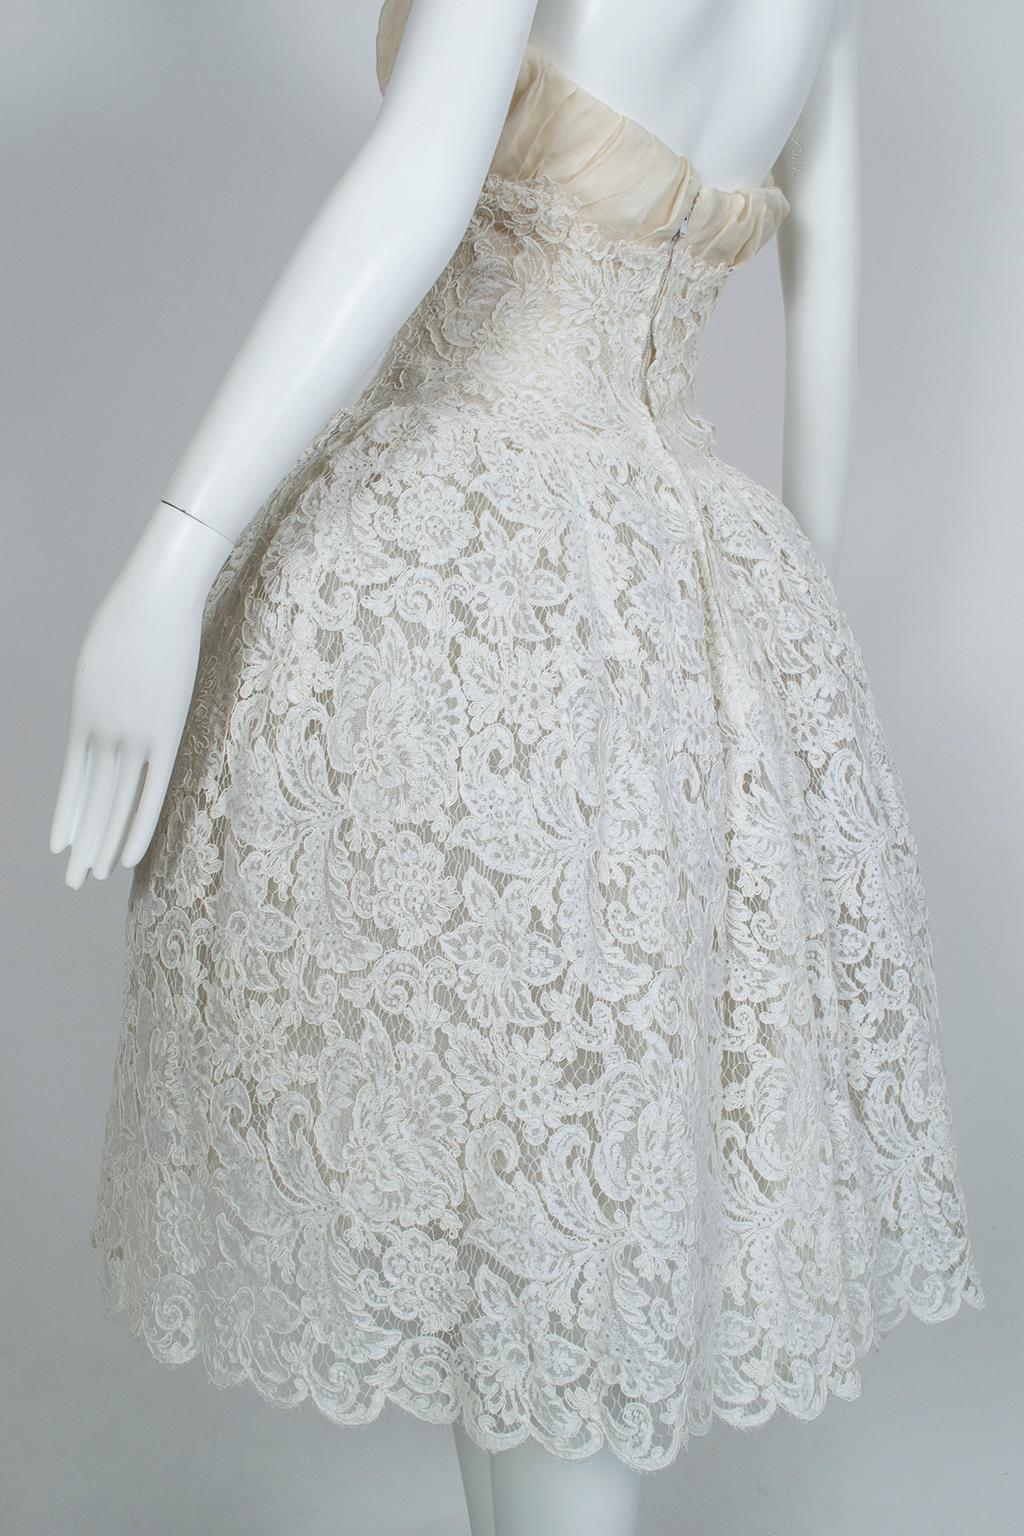 Strapless Ivory Guipure Lace Corseted Robe Française Wedding Dress - XS, 1950s 5